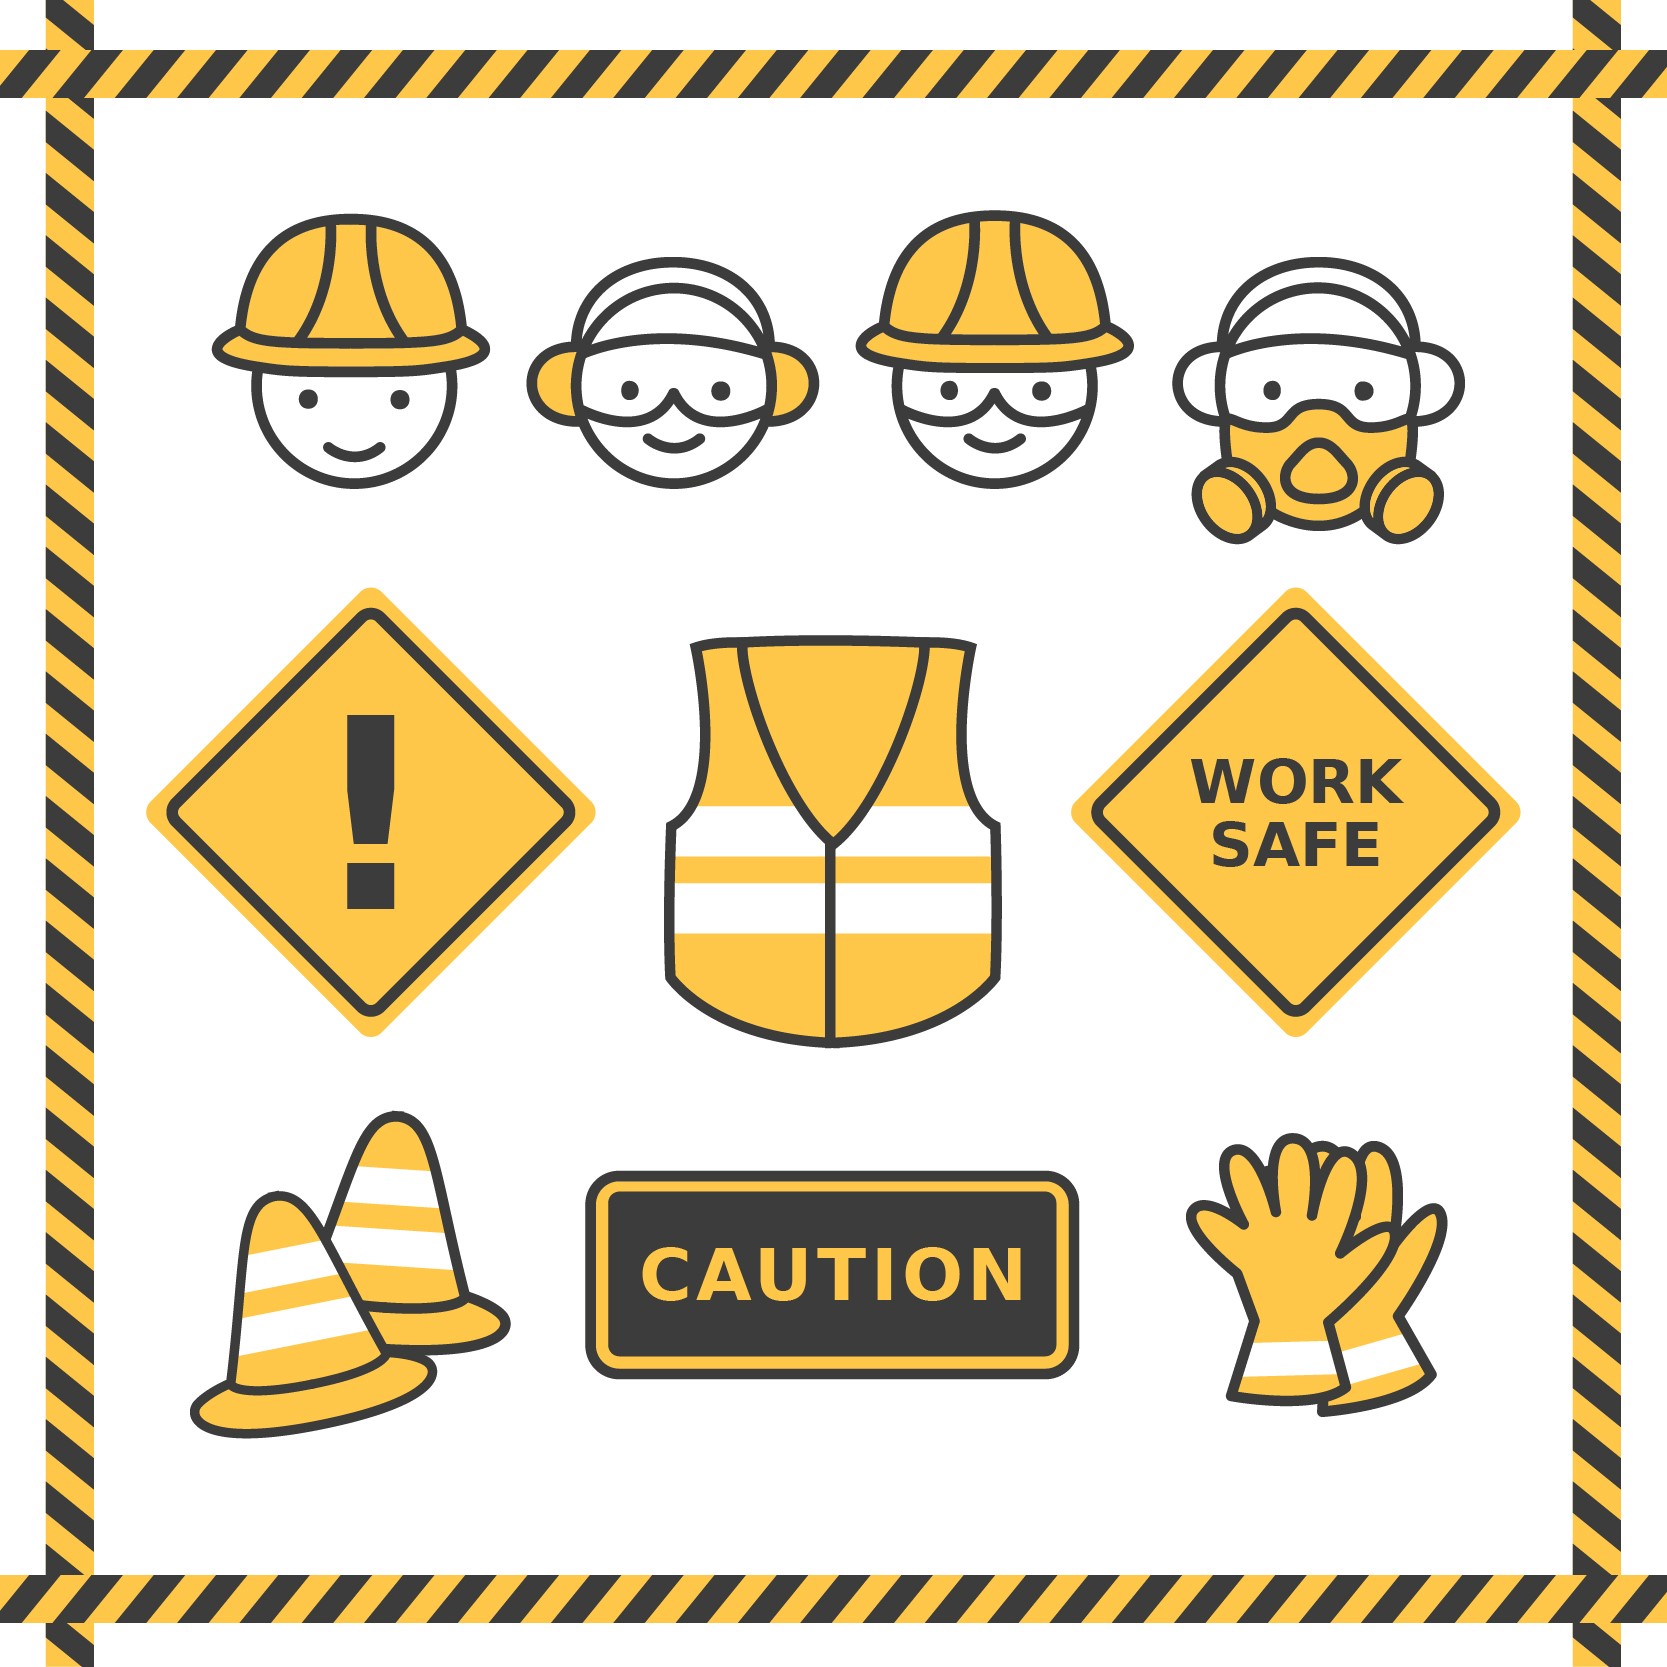 Cartoon Illustration Gallery: Health and Safety posters